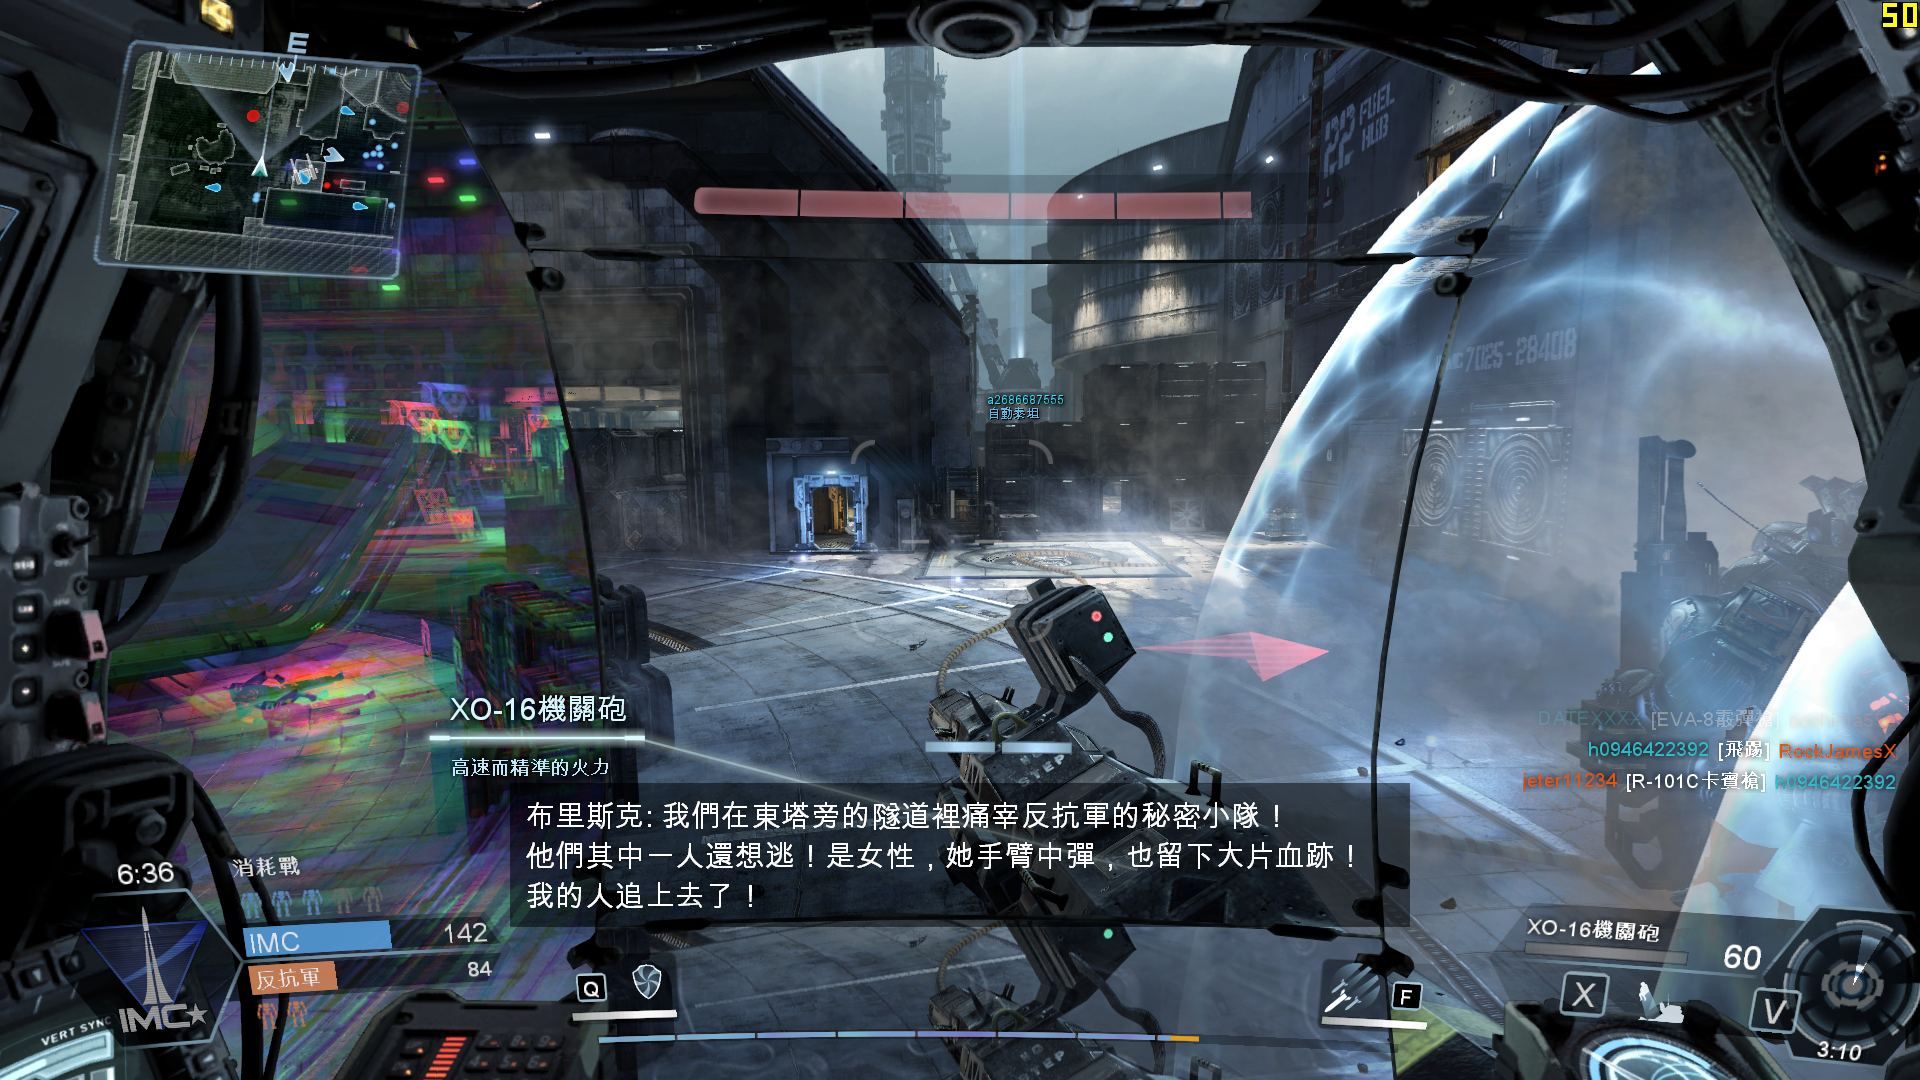 TitanFall 2014-03-21 23-35-56-44.png